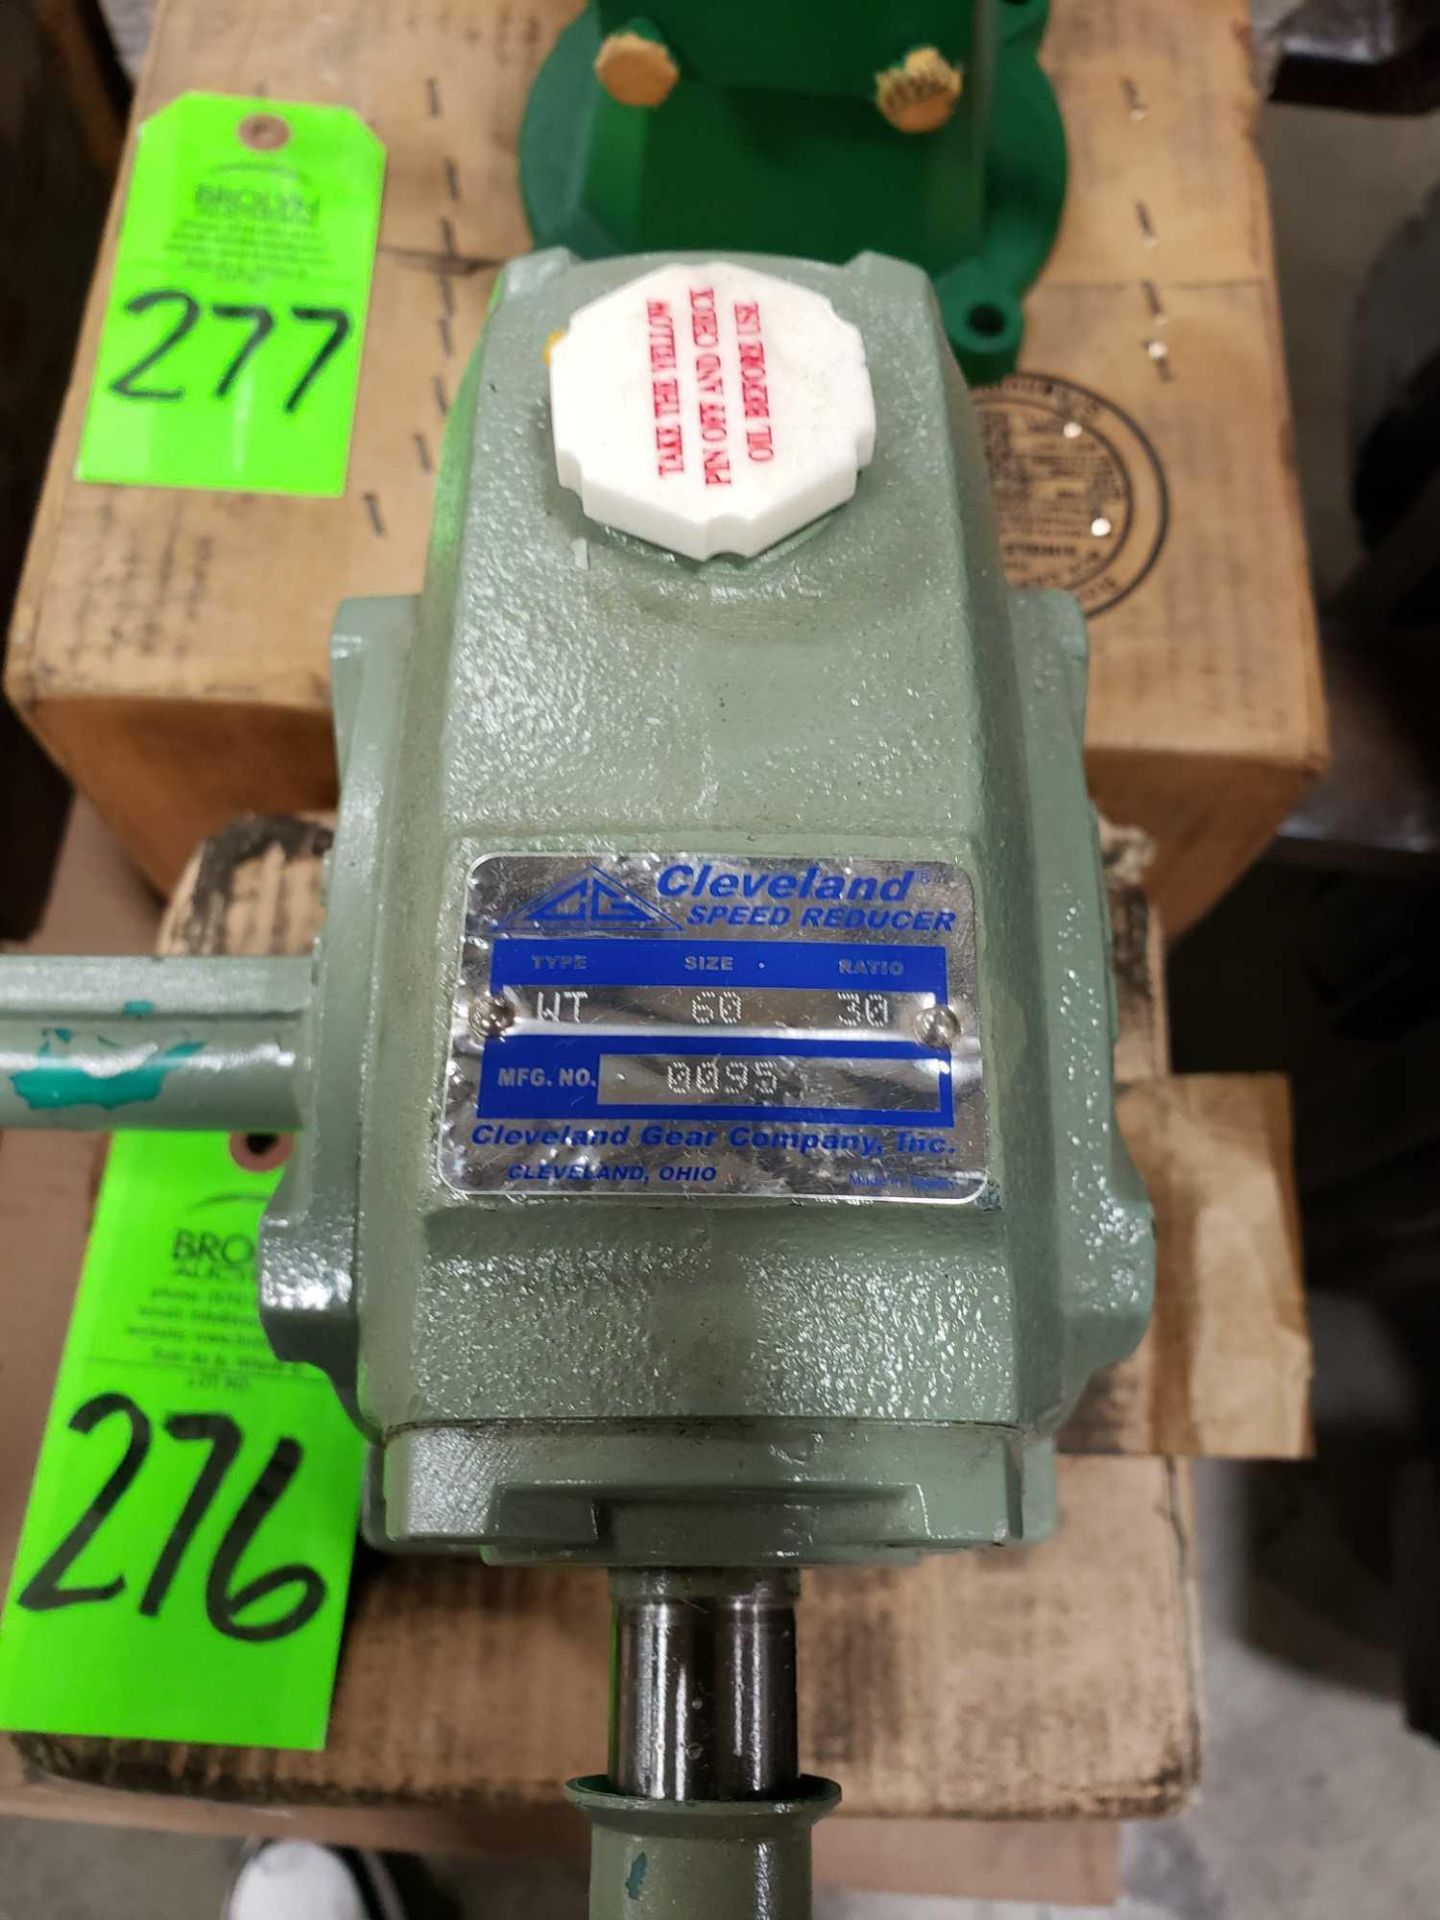 Cleveland speed reducer gear box type WT. Size 60, ratio 30:1. New in box. - Image 2 of 3